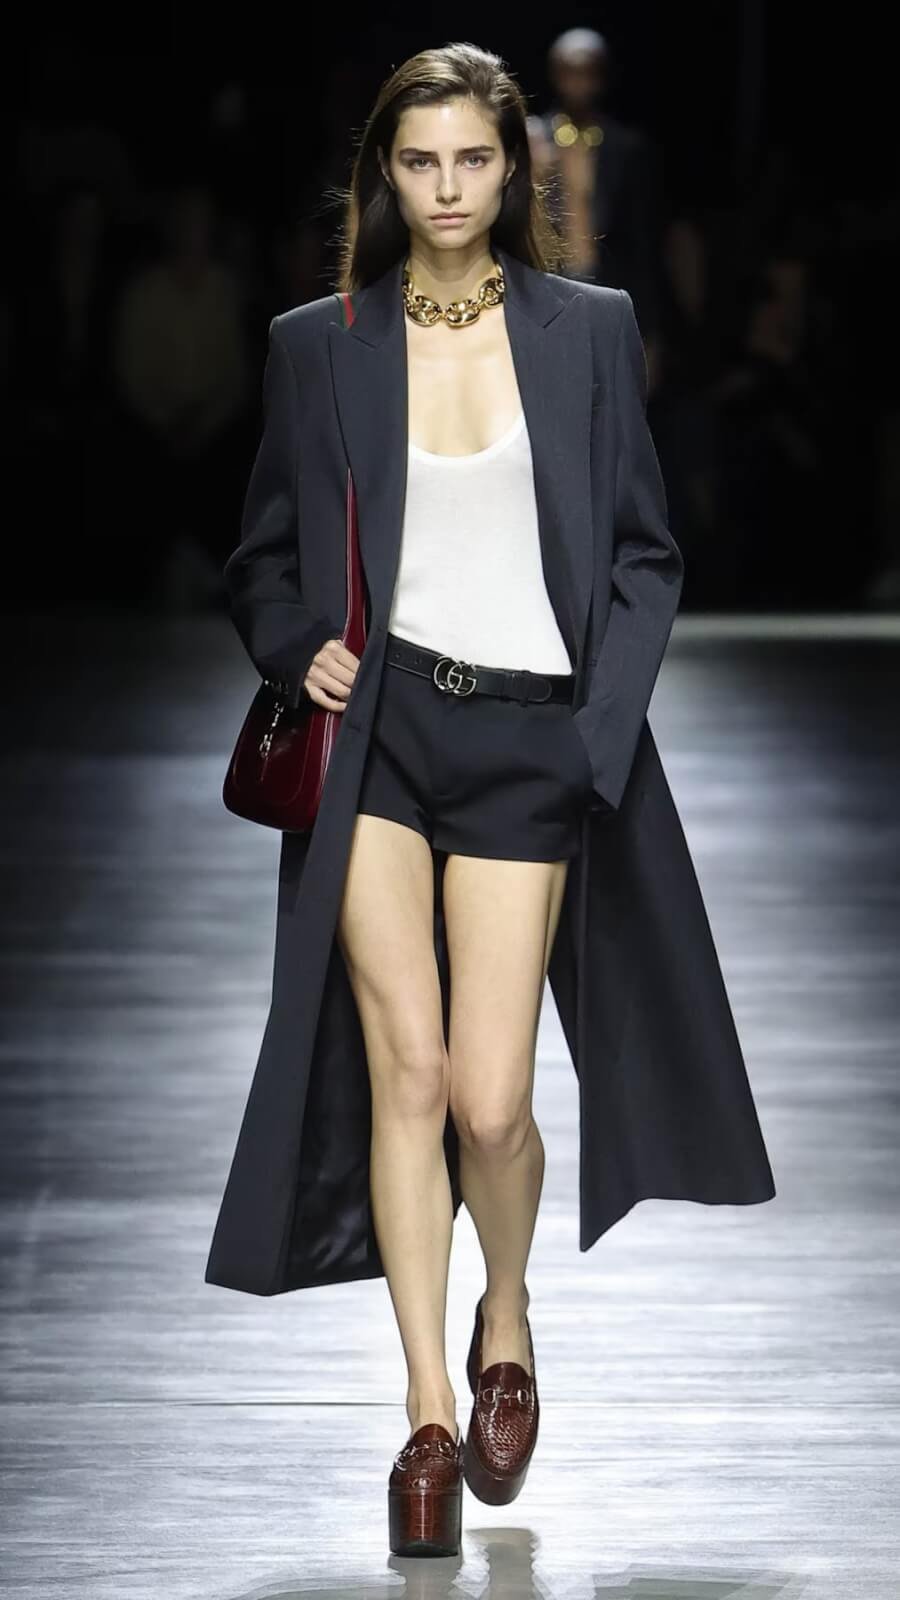 Brunette woman walking on runway with Gucci clothing and accessories.